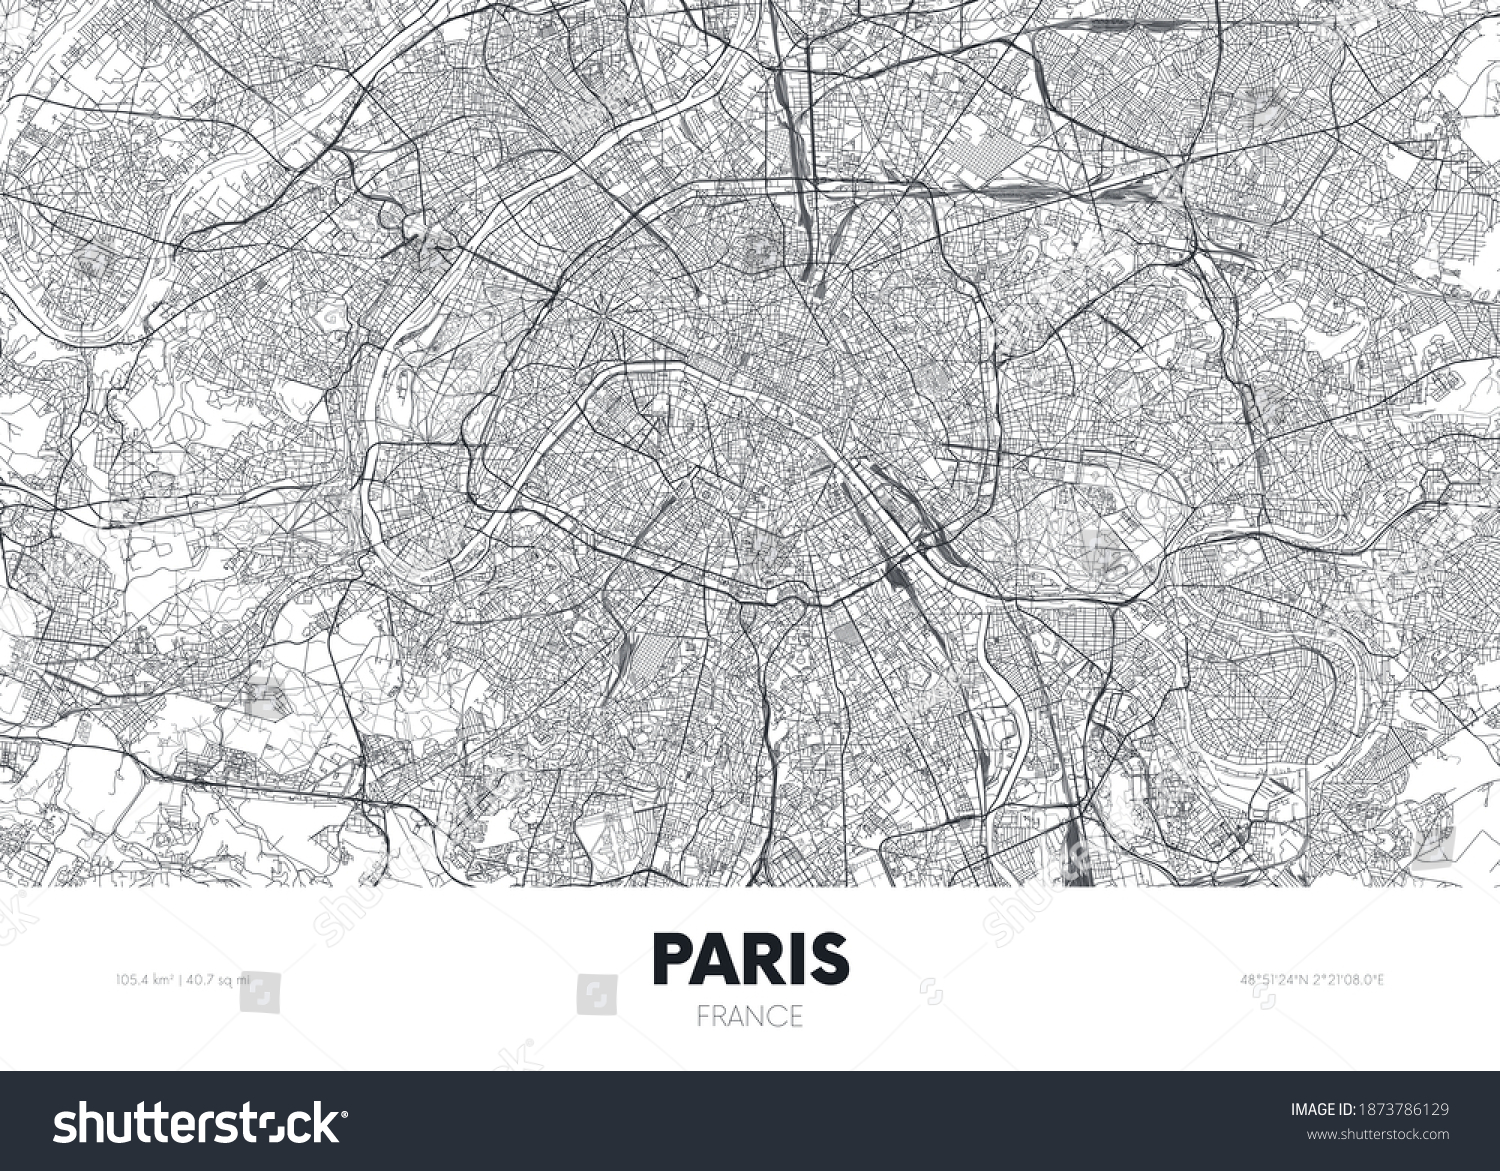 City Map Paris France Travel Poster Stock Vector (Royalty Free ...